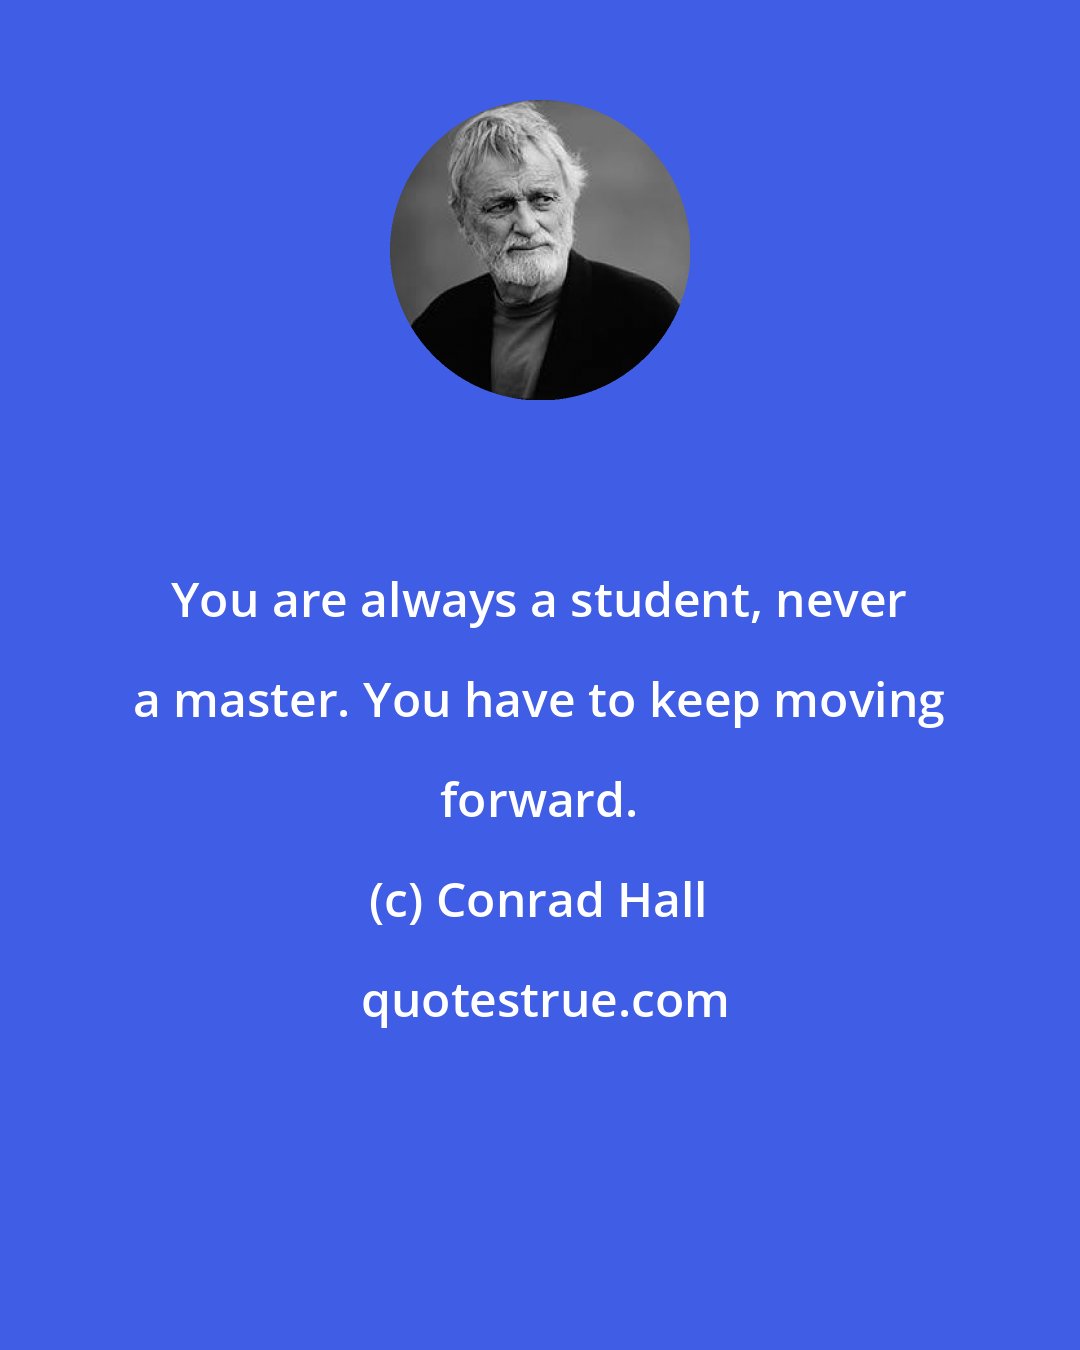 Conrad Hall: You are always a student, never a master. You have to keep moving forward.